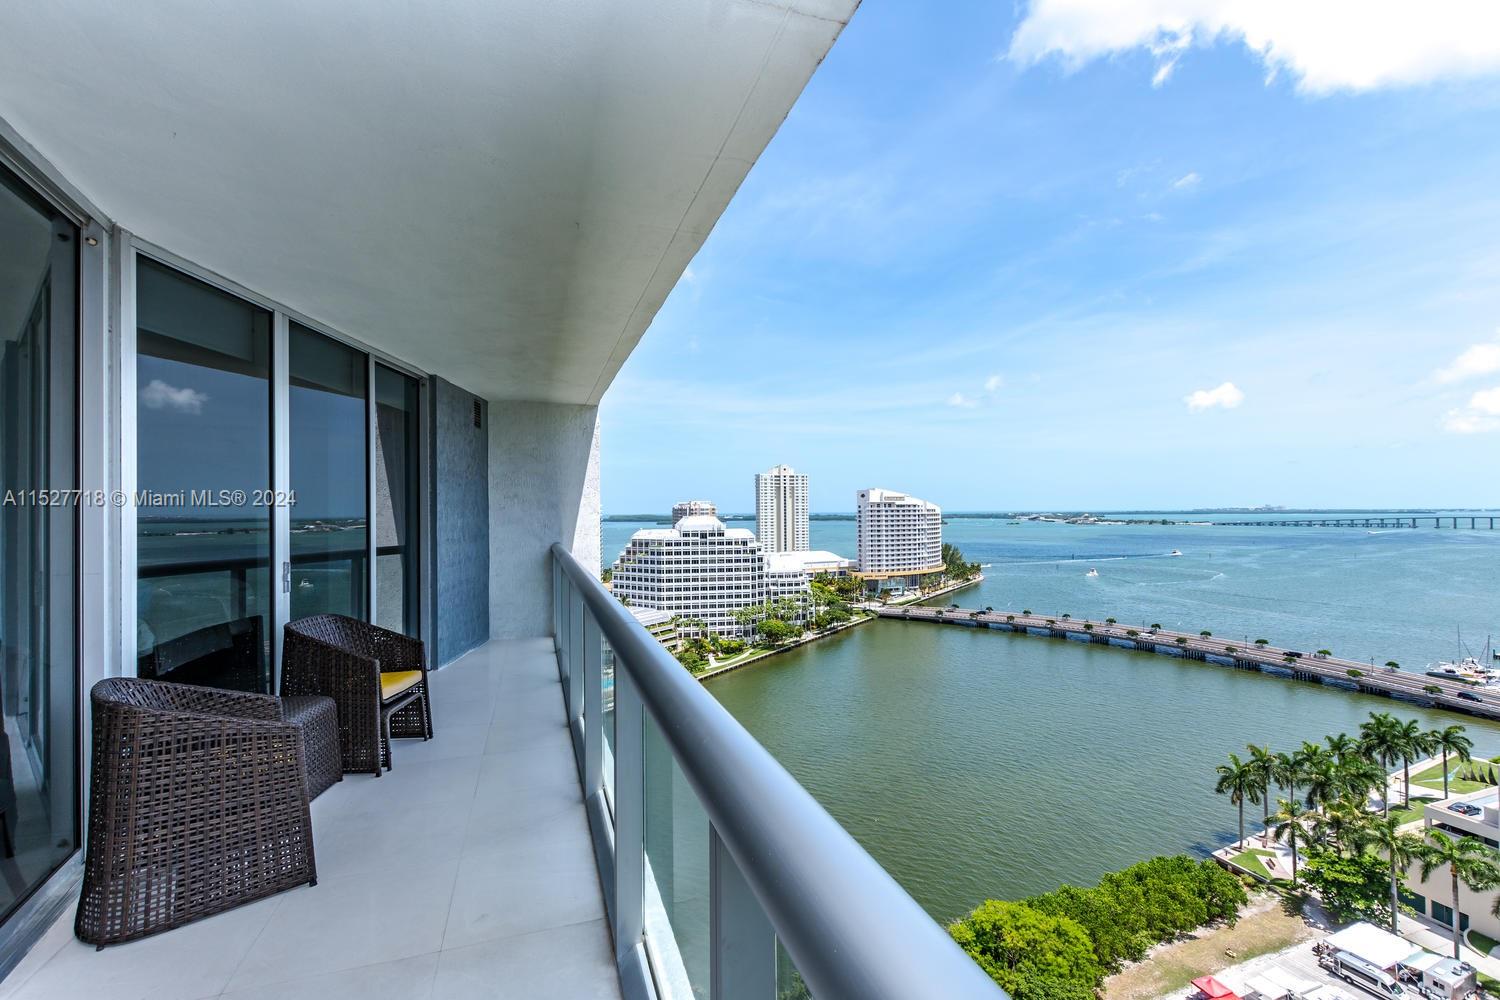 2bed+ Den 1,450 Sq. ft. w/ bay views facing SE towards Biscayne Bay. Unit has 24x24 white porcelain flooring,roller shade and blackouts, Build in Closets. Den area can be used as office or 3rd bedroom. Building offers resortstyle amenities including s tate-of-the-art fitness center with classes, full service spa, infinity pool overlookingBiscayne Bay, restaurants on site, 24-hr concierge and valet and much more. Centrally located in the heart ofBrickell, 2 blocks from Mary Brickell Village and more.